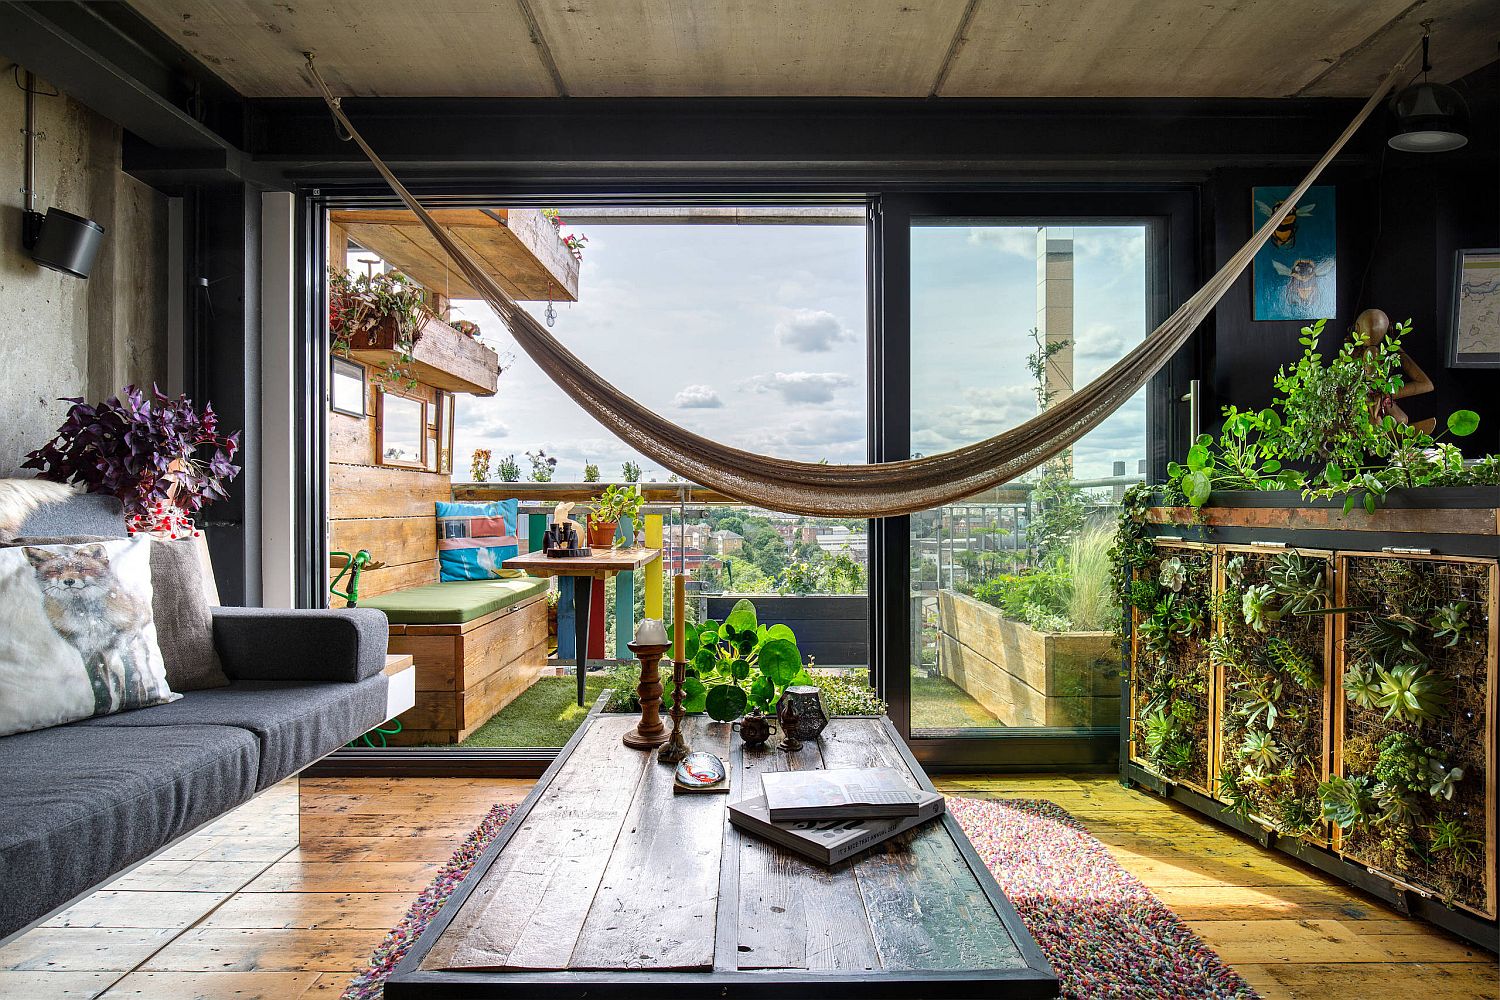 Hanging-a-hammock-in-the-living-room-gives-it-that-casual-boho-chic-look-without-ever-trying-too-hard-62044